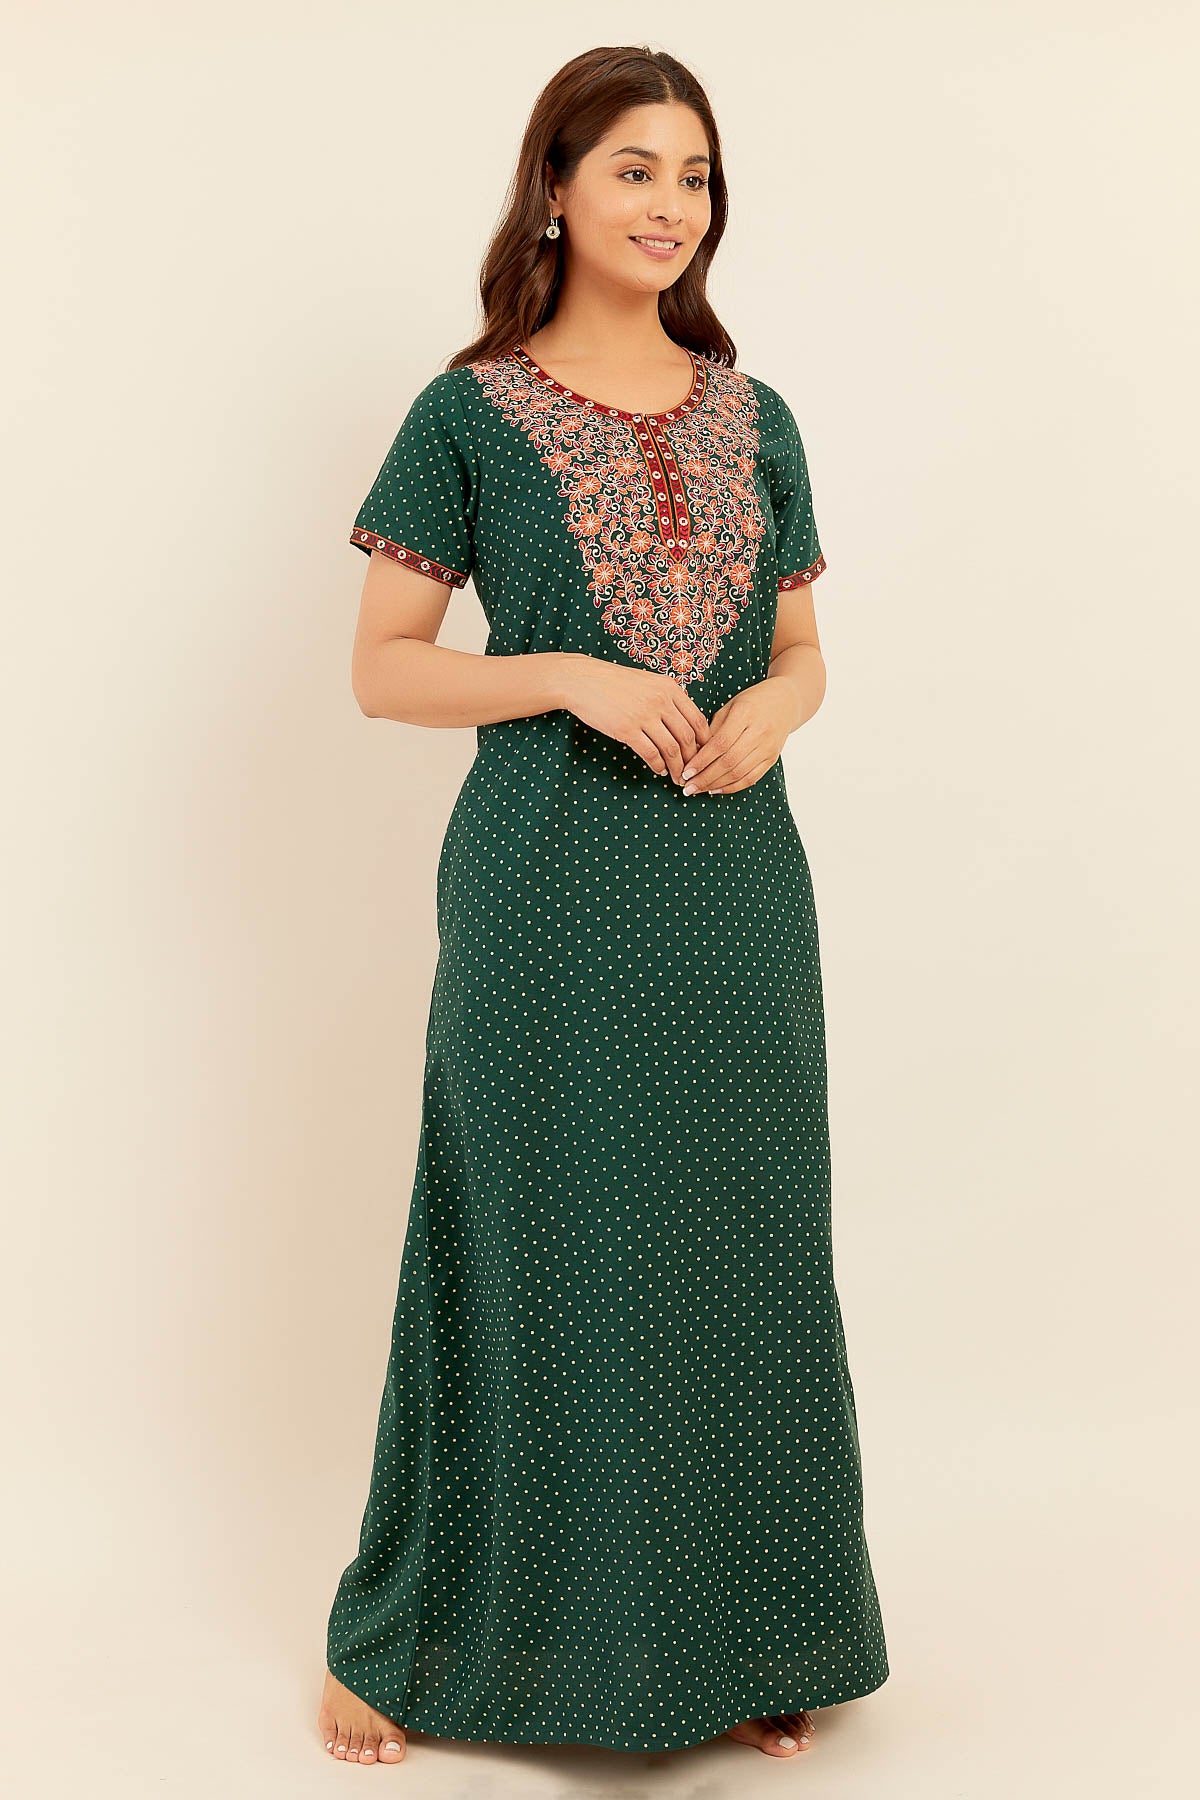 Allover Polka Dotted With Floral Embroidered Yoke Nighty - Green